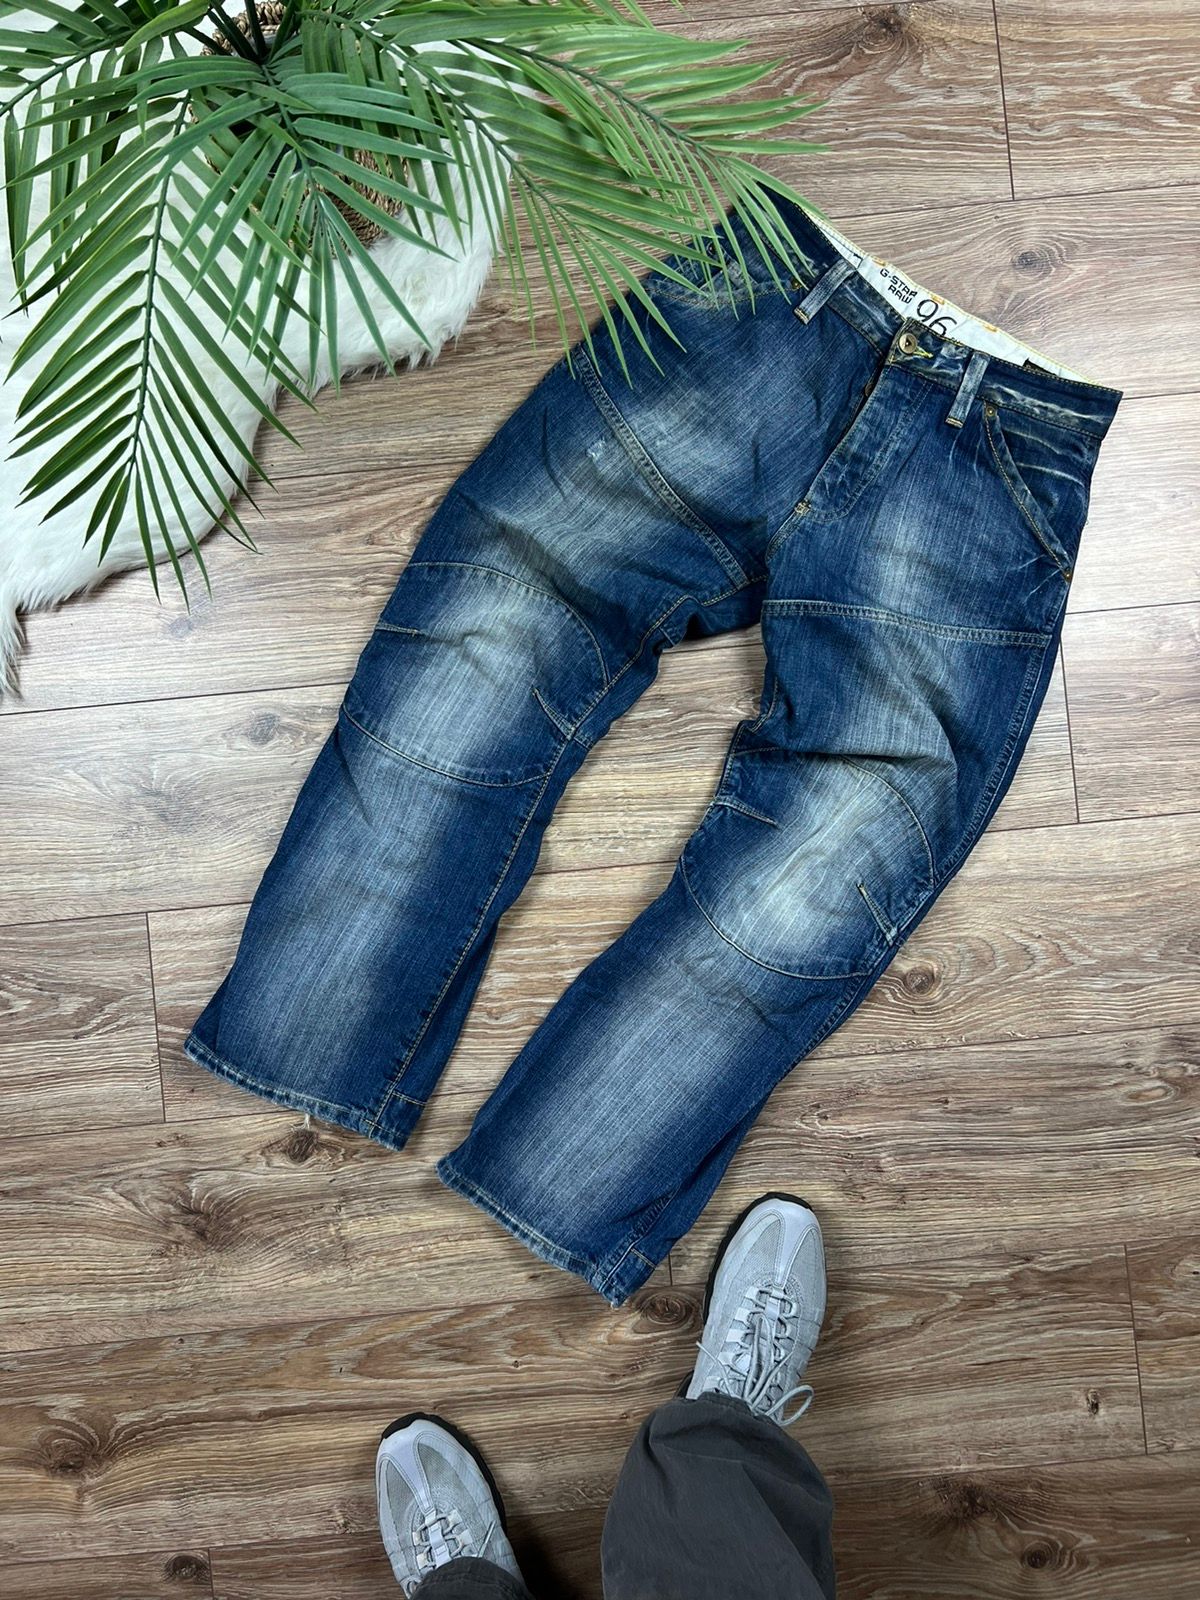 Vintage 💫 90’S G-STAR RAW VINTAGE DOUBLE KNEE OPIUM WASHED JEANS Size US 30 / EU 46 - 7 Thumbnail